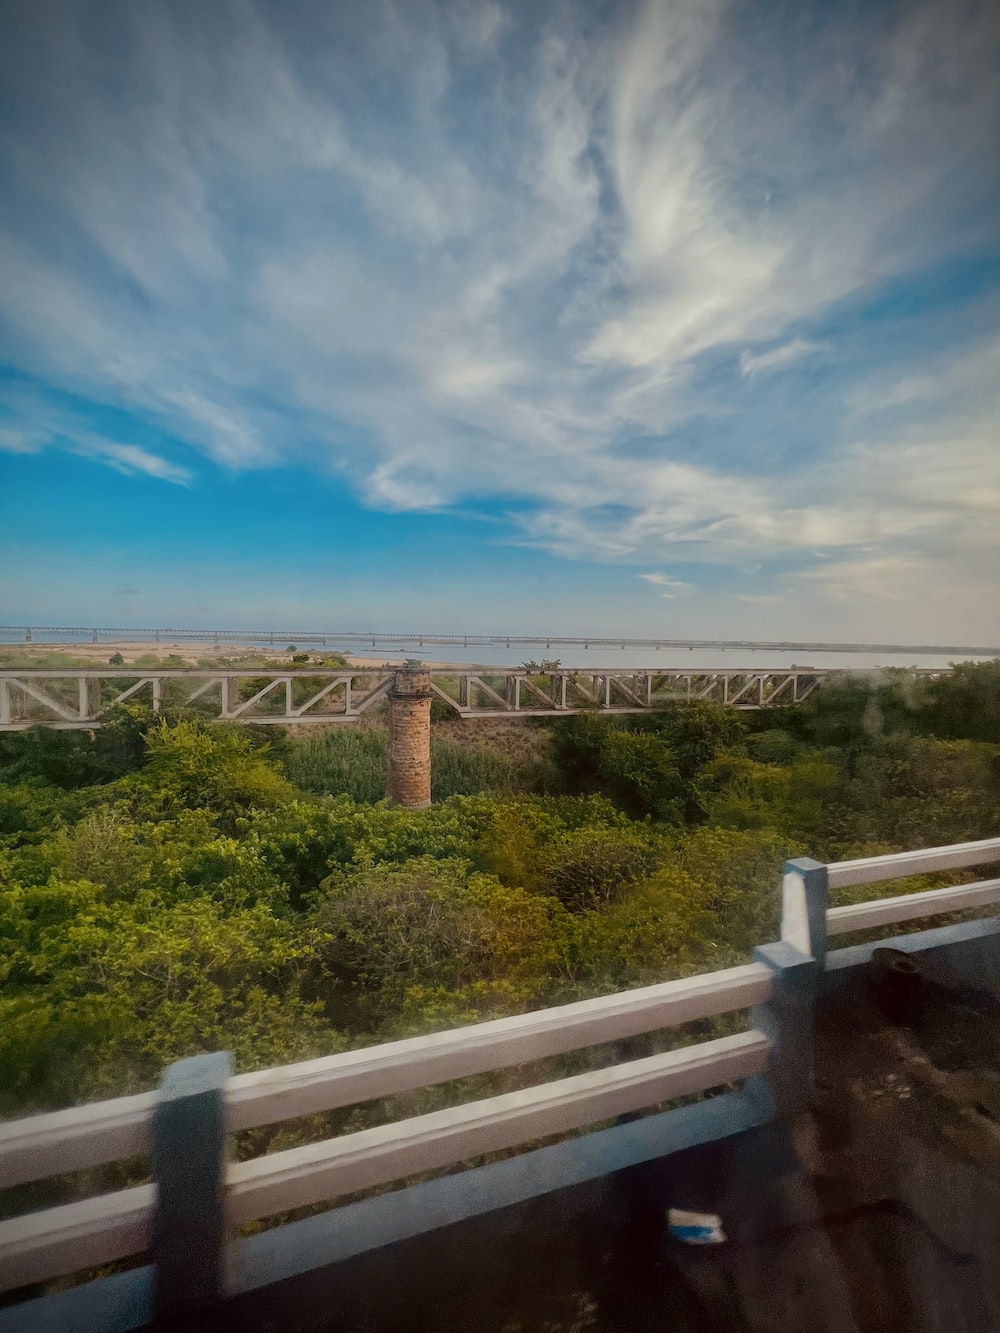 a view of a bridge from a moving vehicle